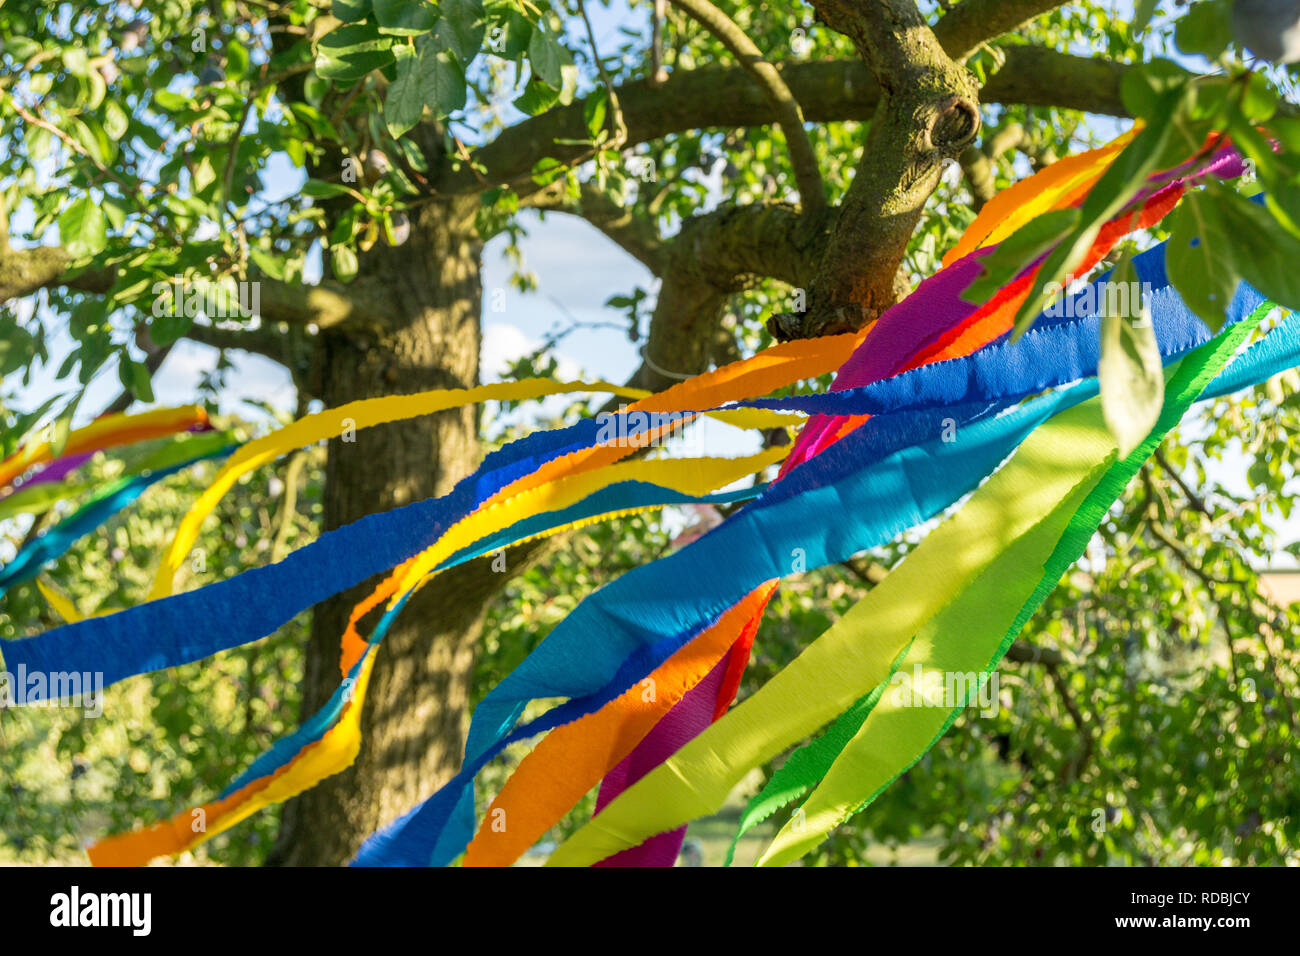 colorful strips or bands at a tree in the garden - concept image of a garden pary Stock Photo